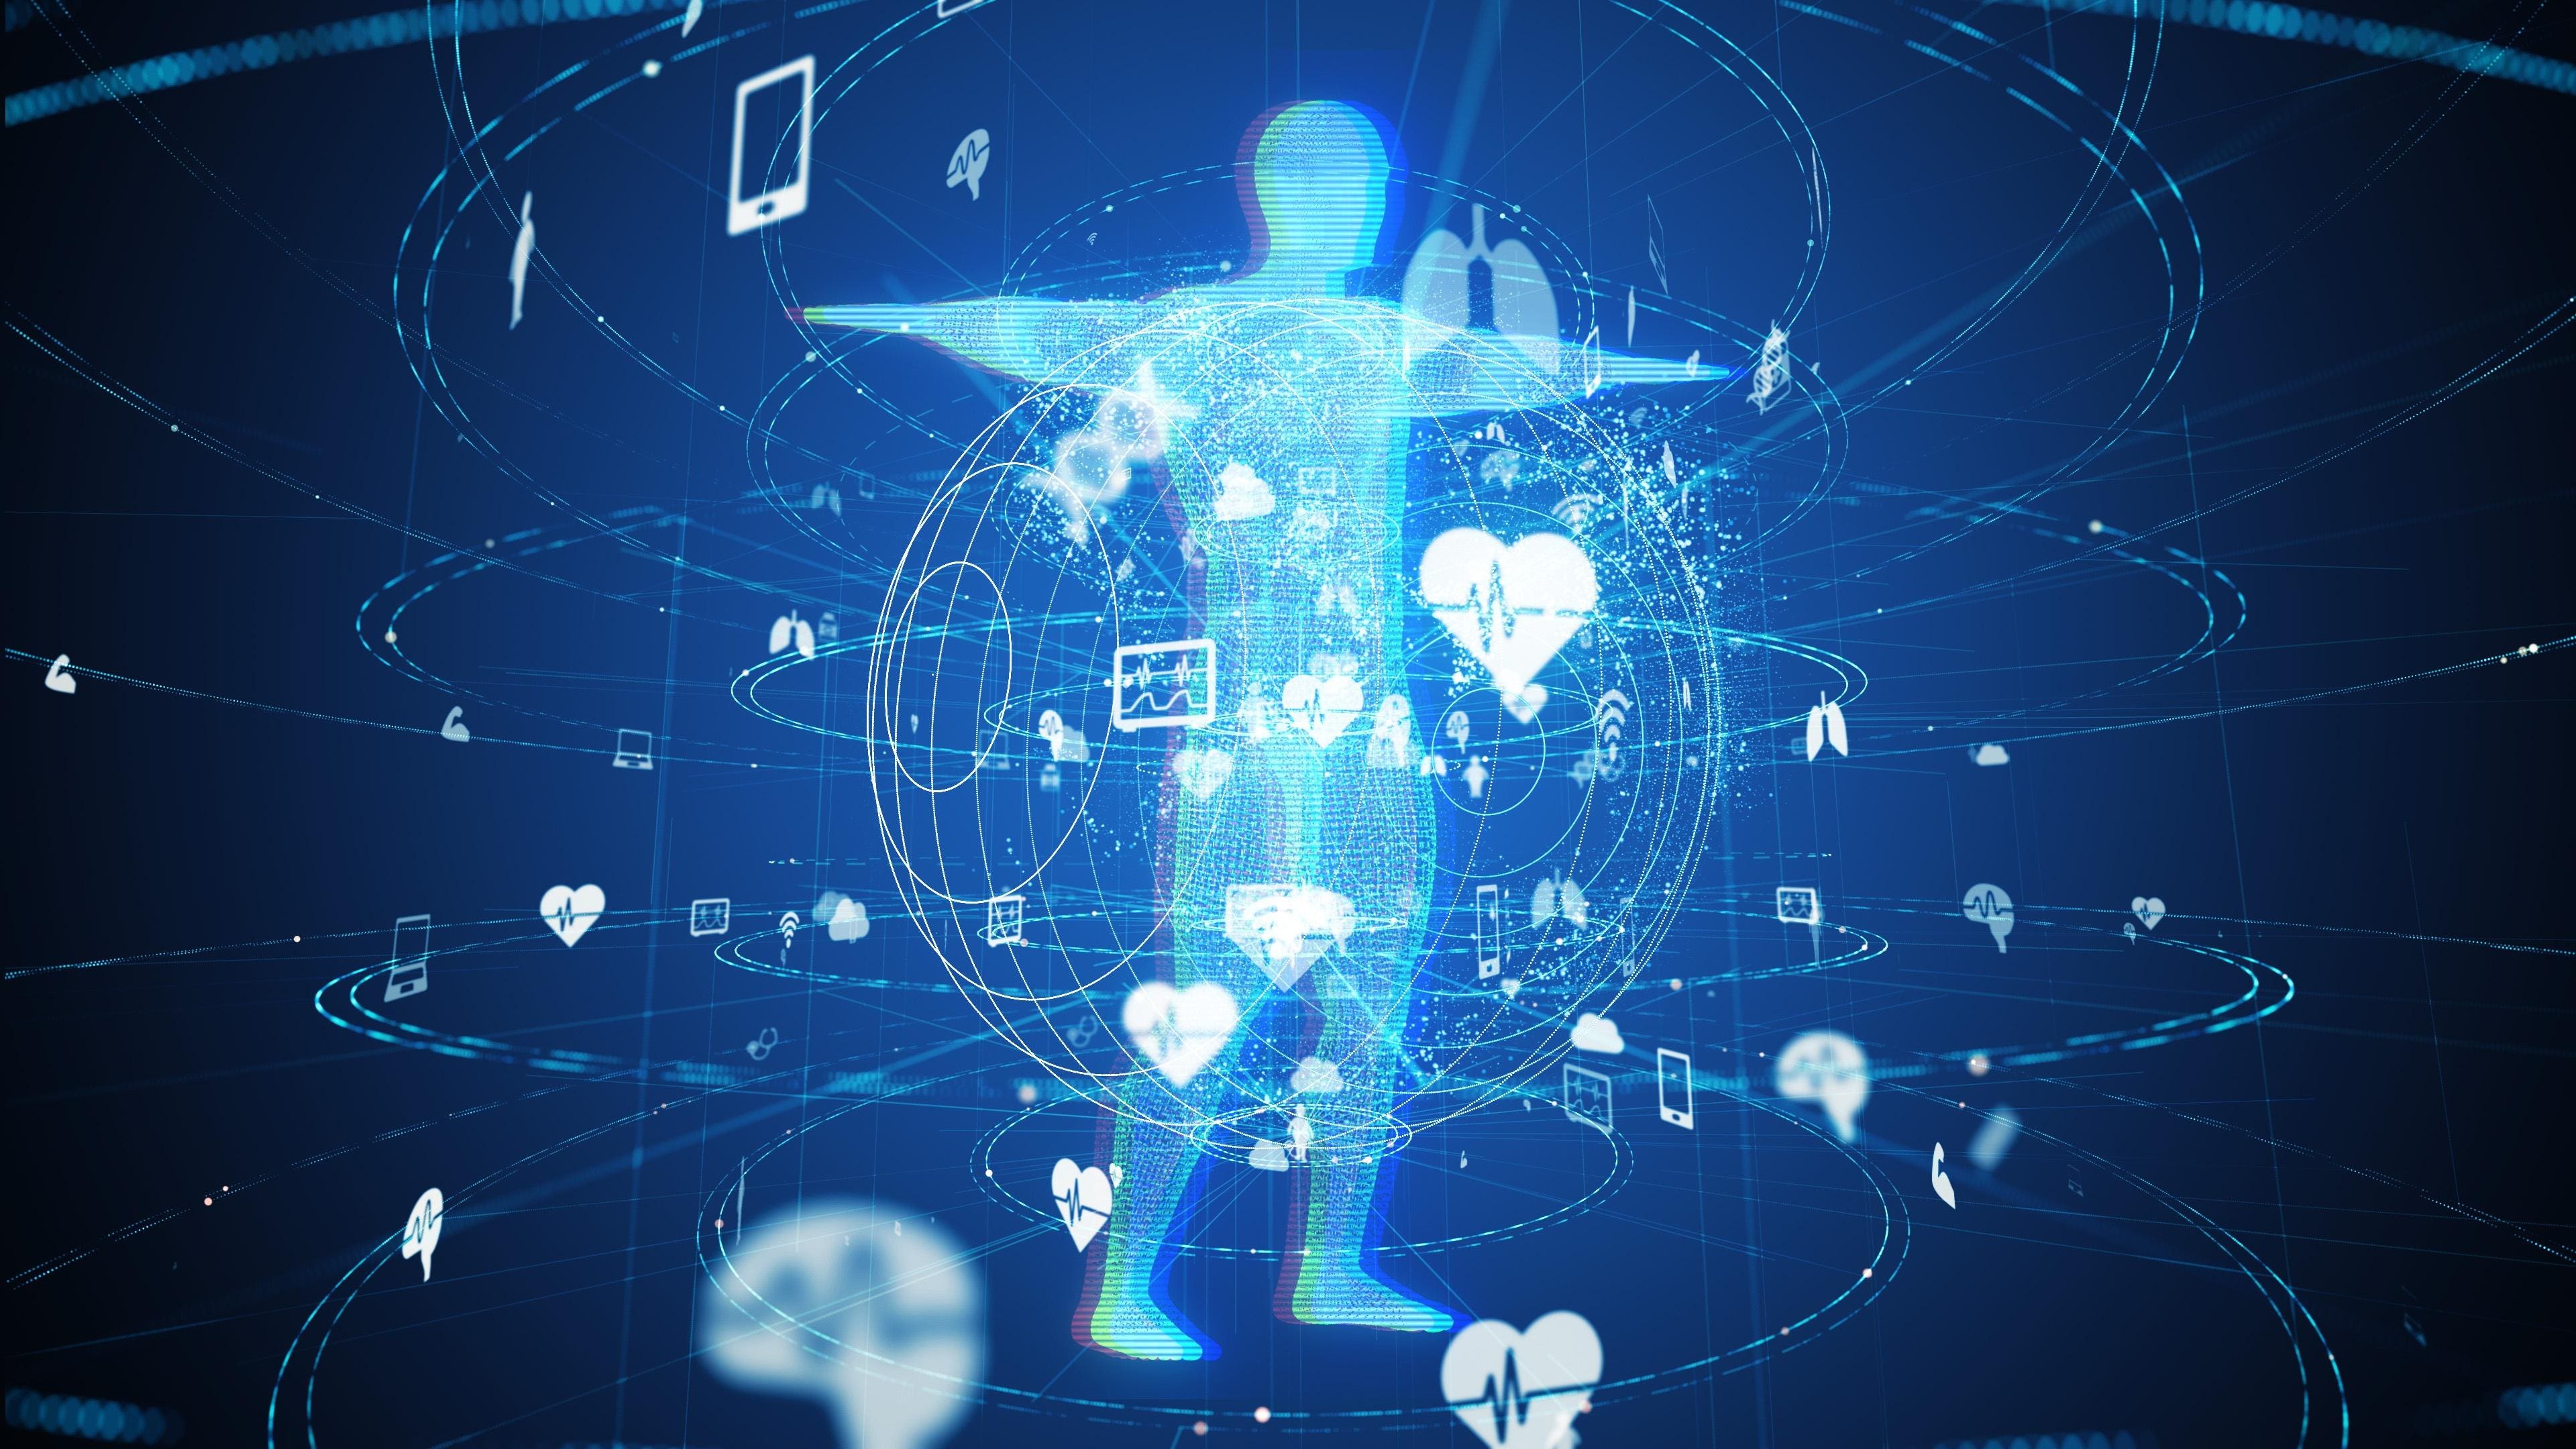 A glowing blue human figure stands in the center of a digital landscape with a network of data and medical symbols representing HIPAA compliance and the protection of patient health information.